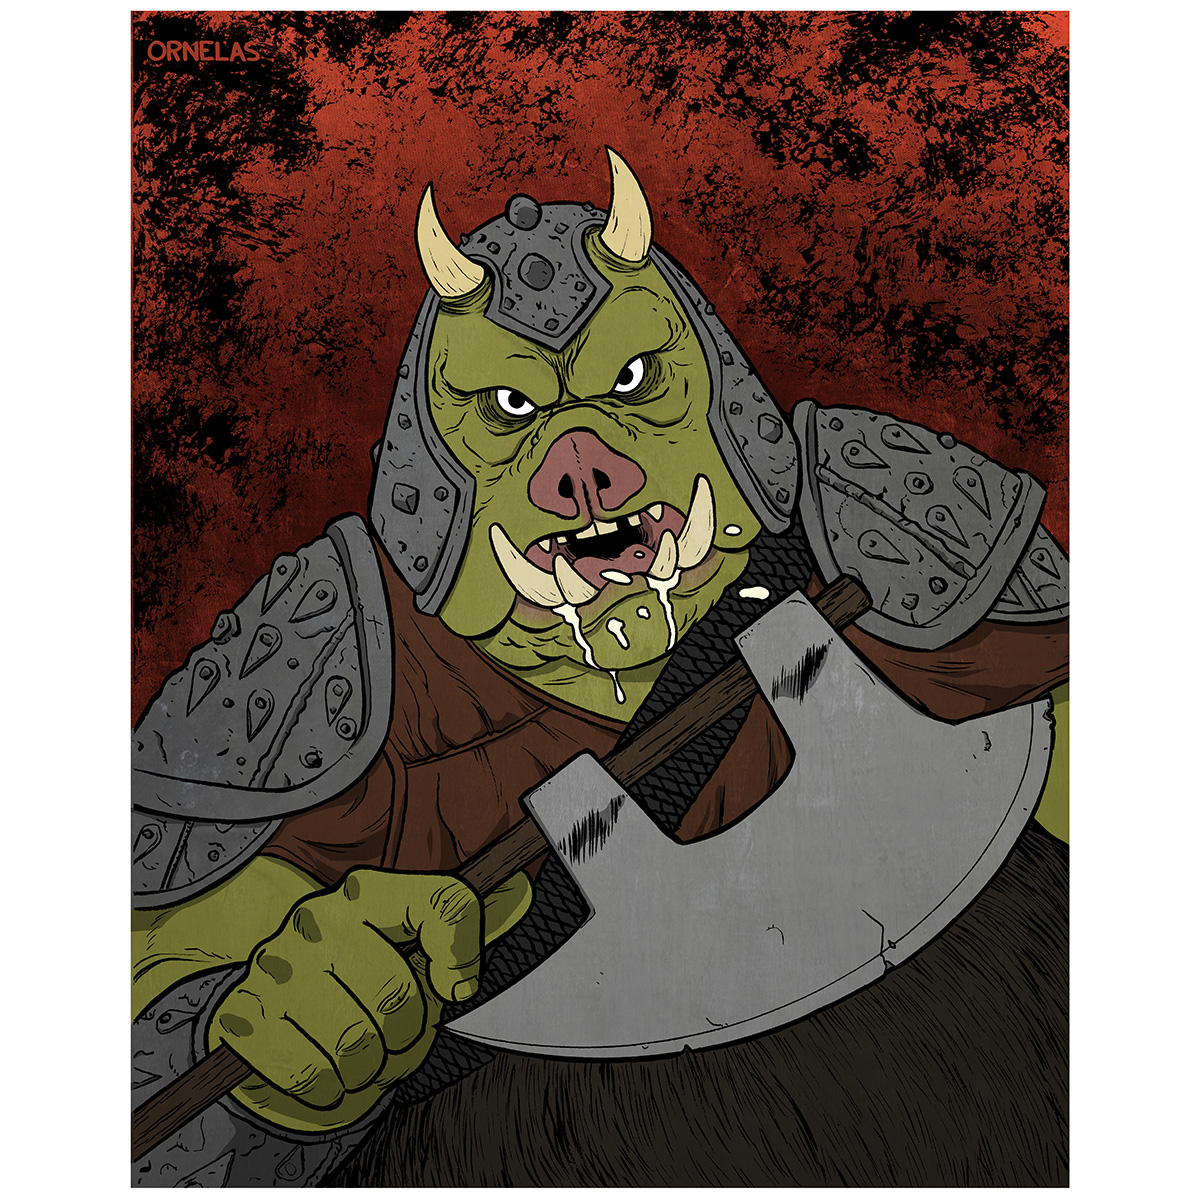 May The Ninth Be With You #BuyOrnelasArt #commissionsopen #comicbooks #comix #supportlocalartists #shopsmall #supportindieartists #alienspecies #Gamorr #gamorreanguard #gamorrean #starwarsart #maythe4thbewithyou #maythefourth